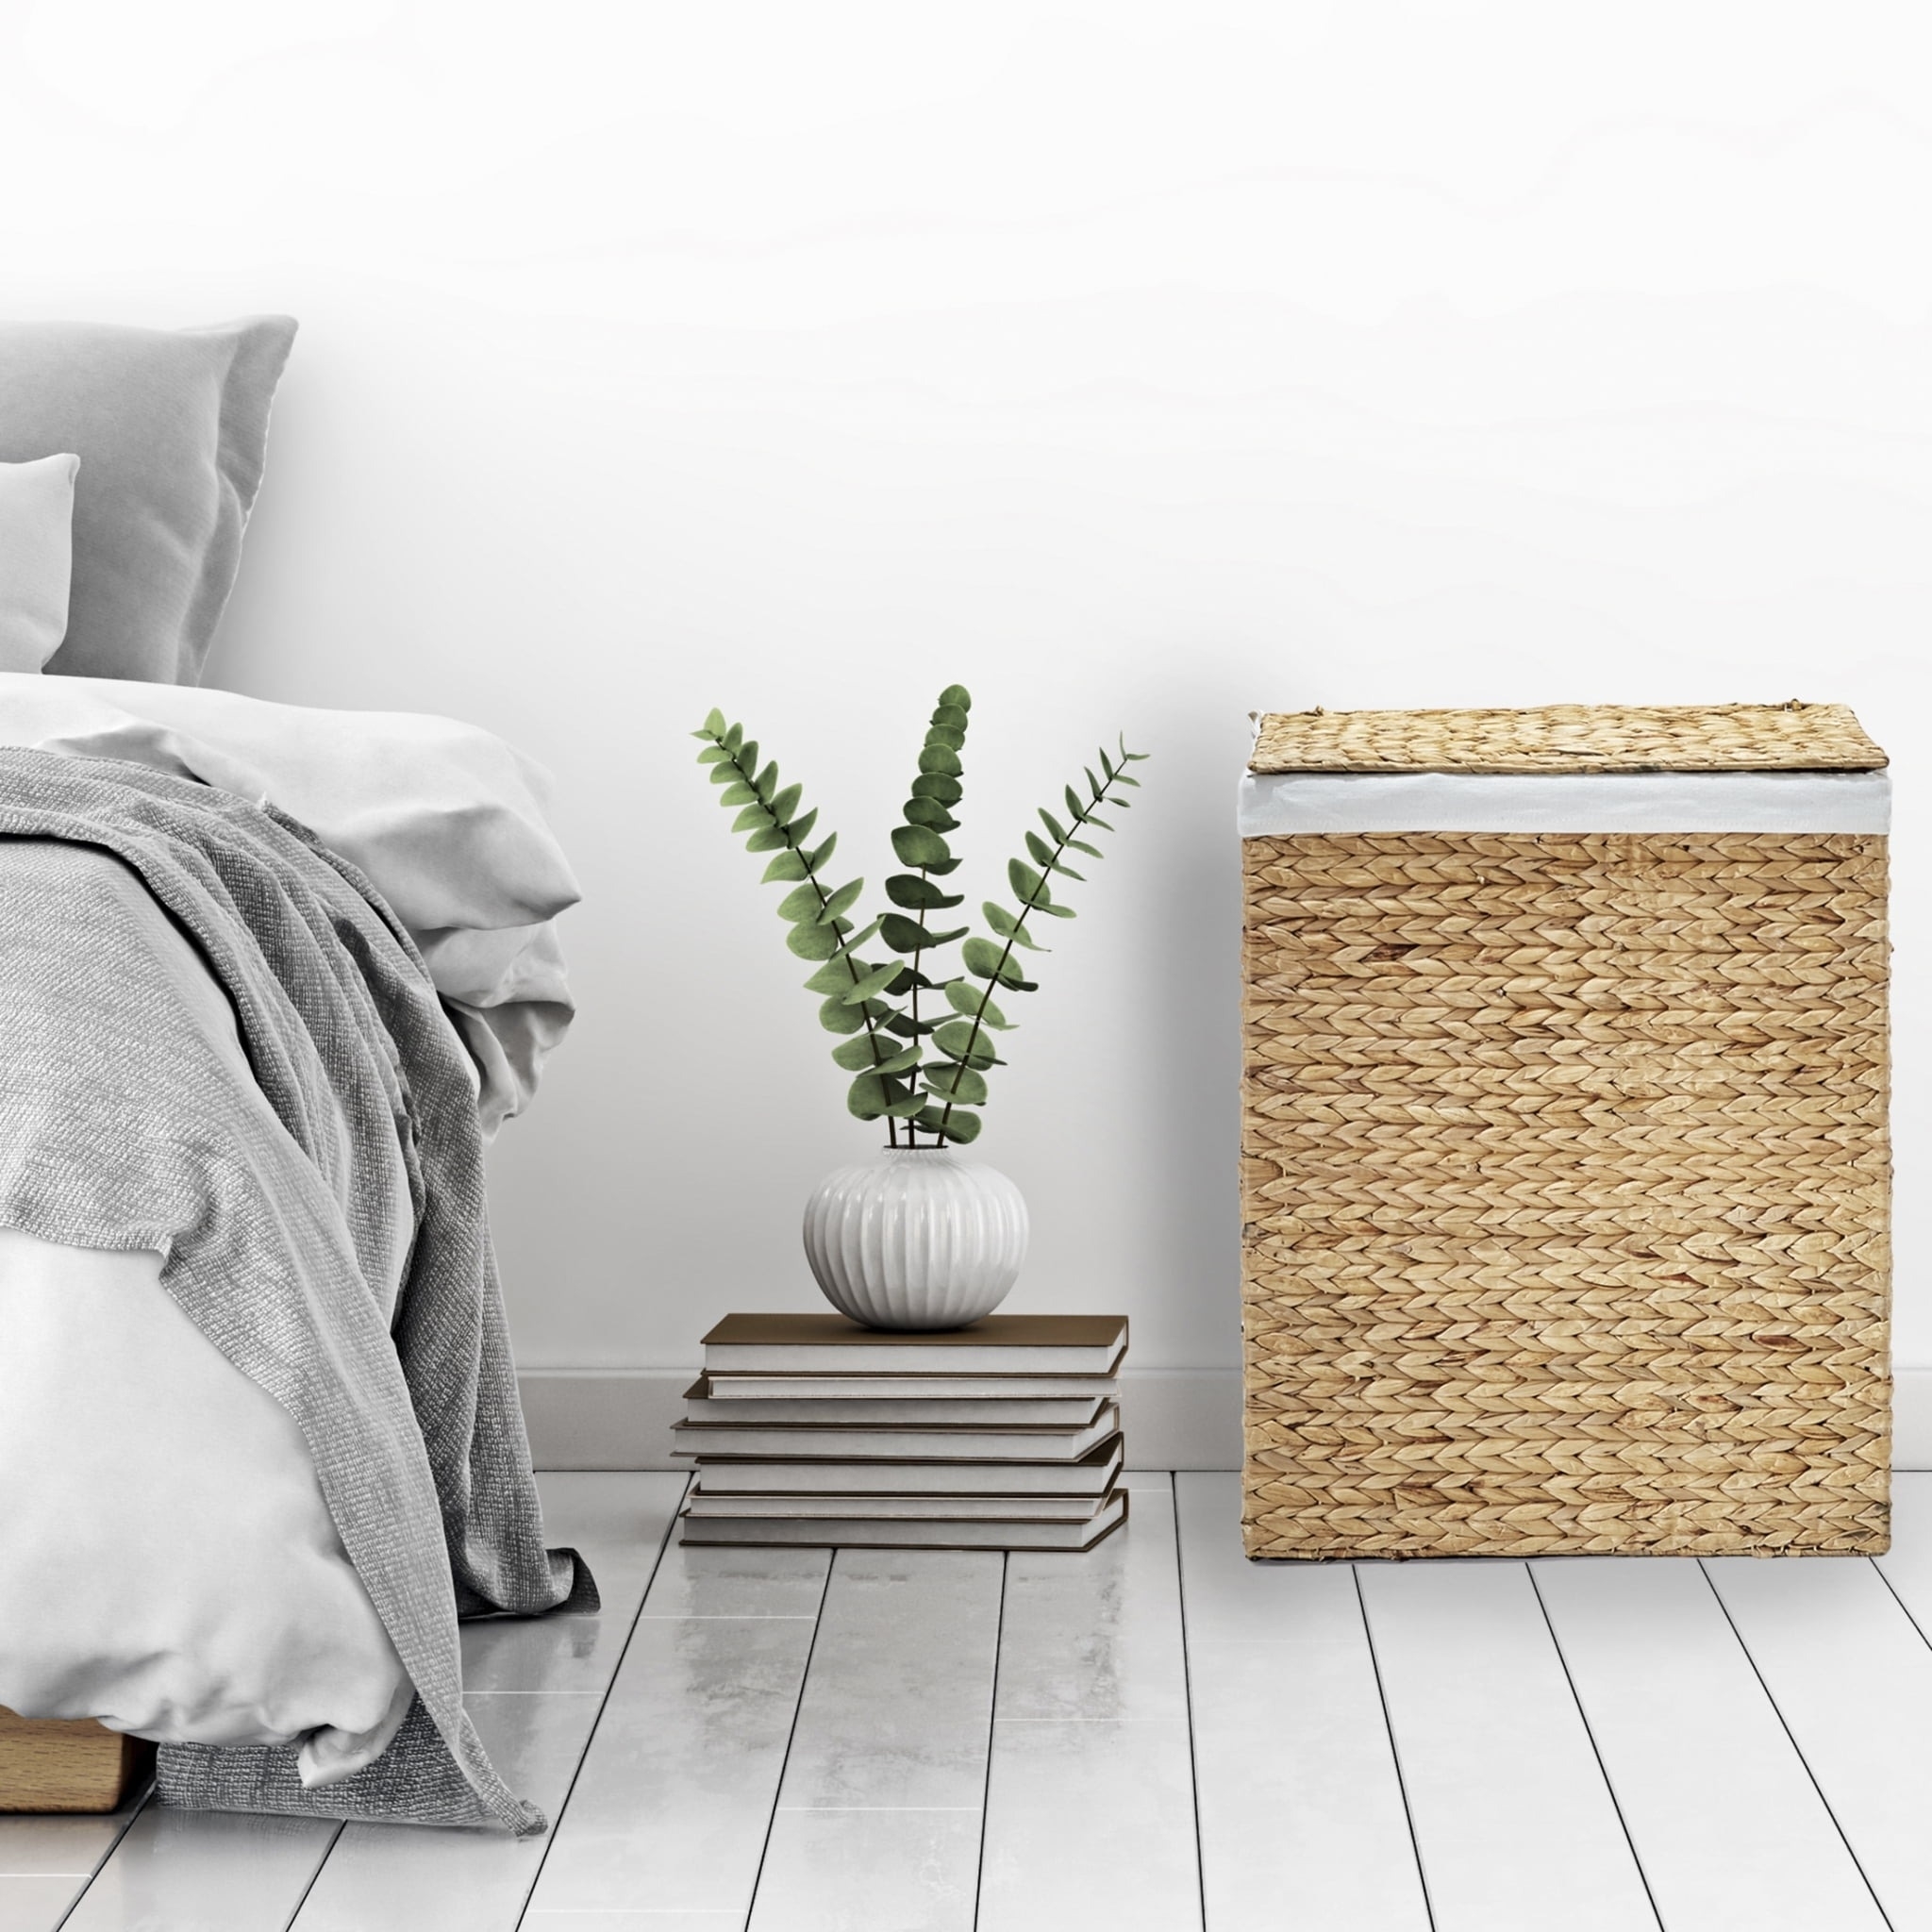 Bed with gray blankets, a woven hamper basket, and a plant on stacked books next to the bed for home decor inspiration